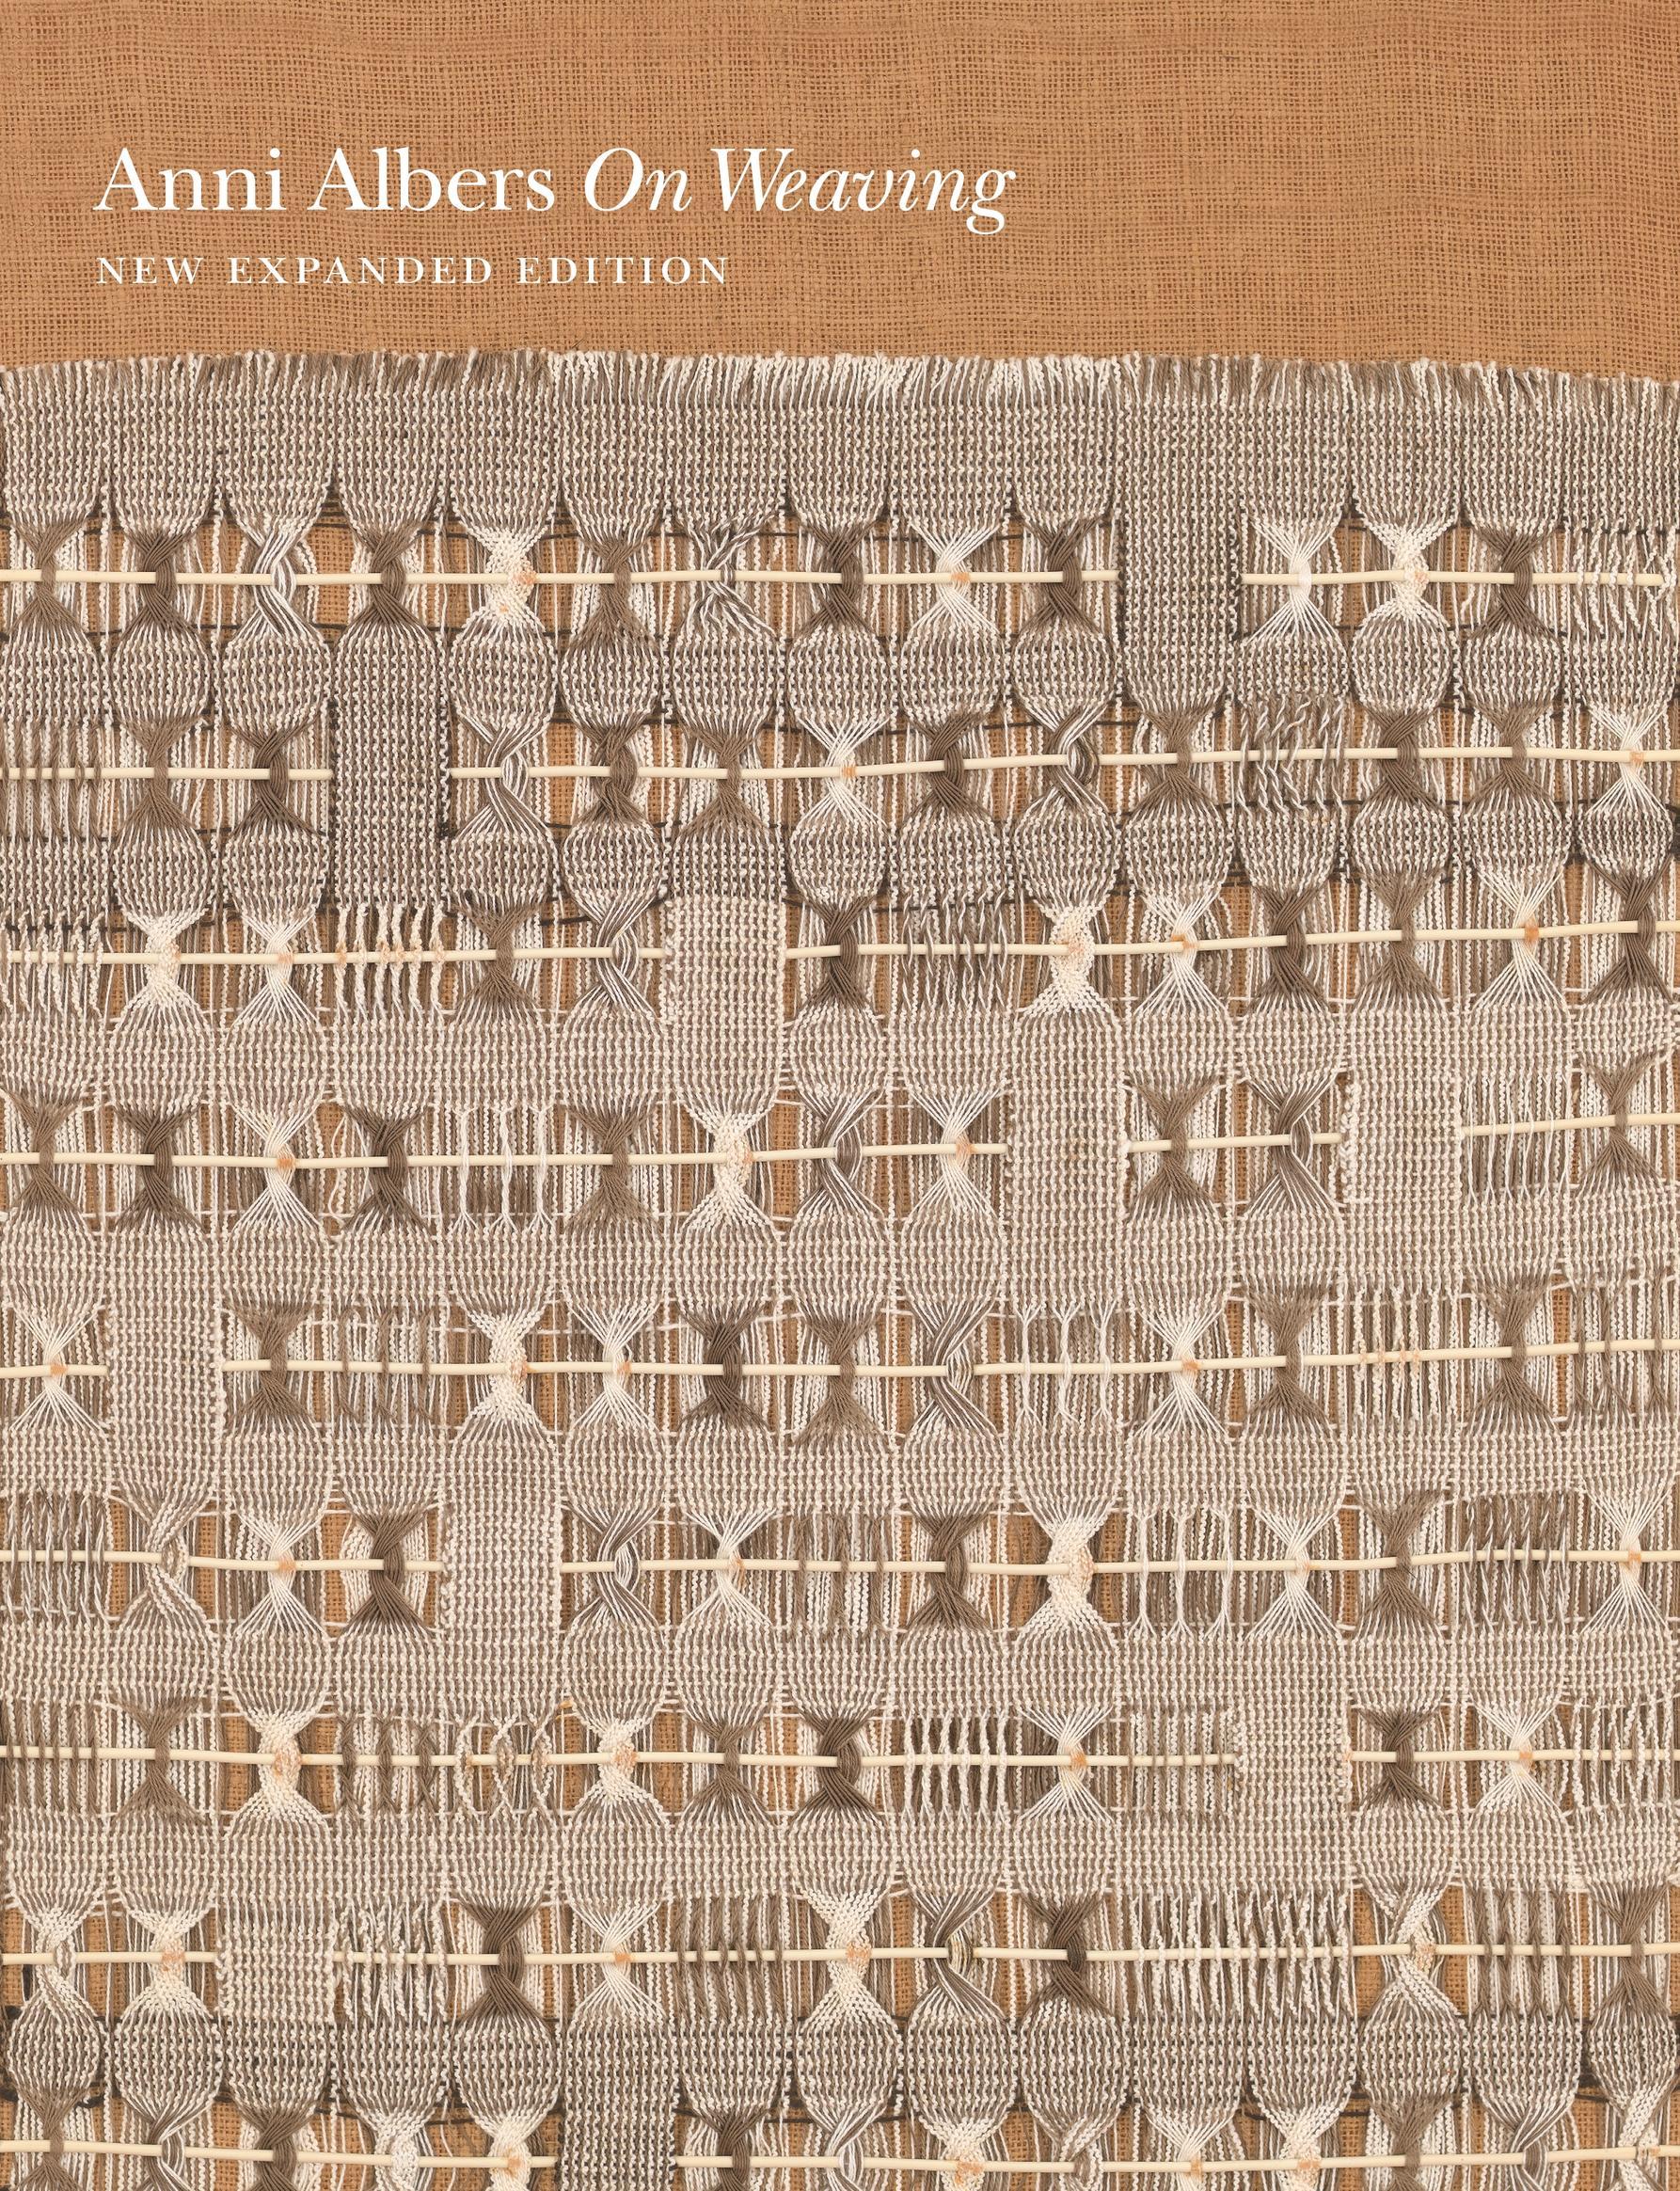 On Weaving | Anni Albers | Buch | Englisch | 2017 | Princeton Univers. Press | EAN 9780691177854 - Albers, Anni